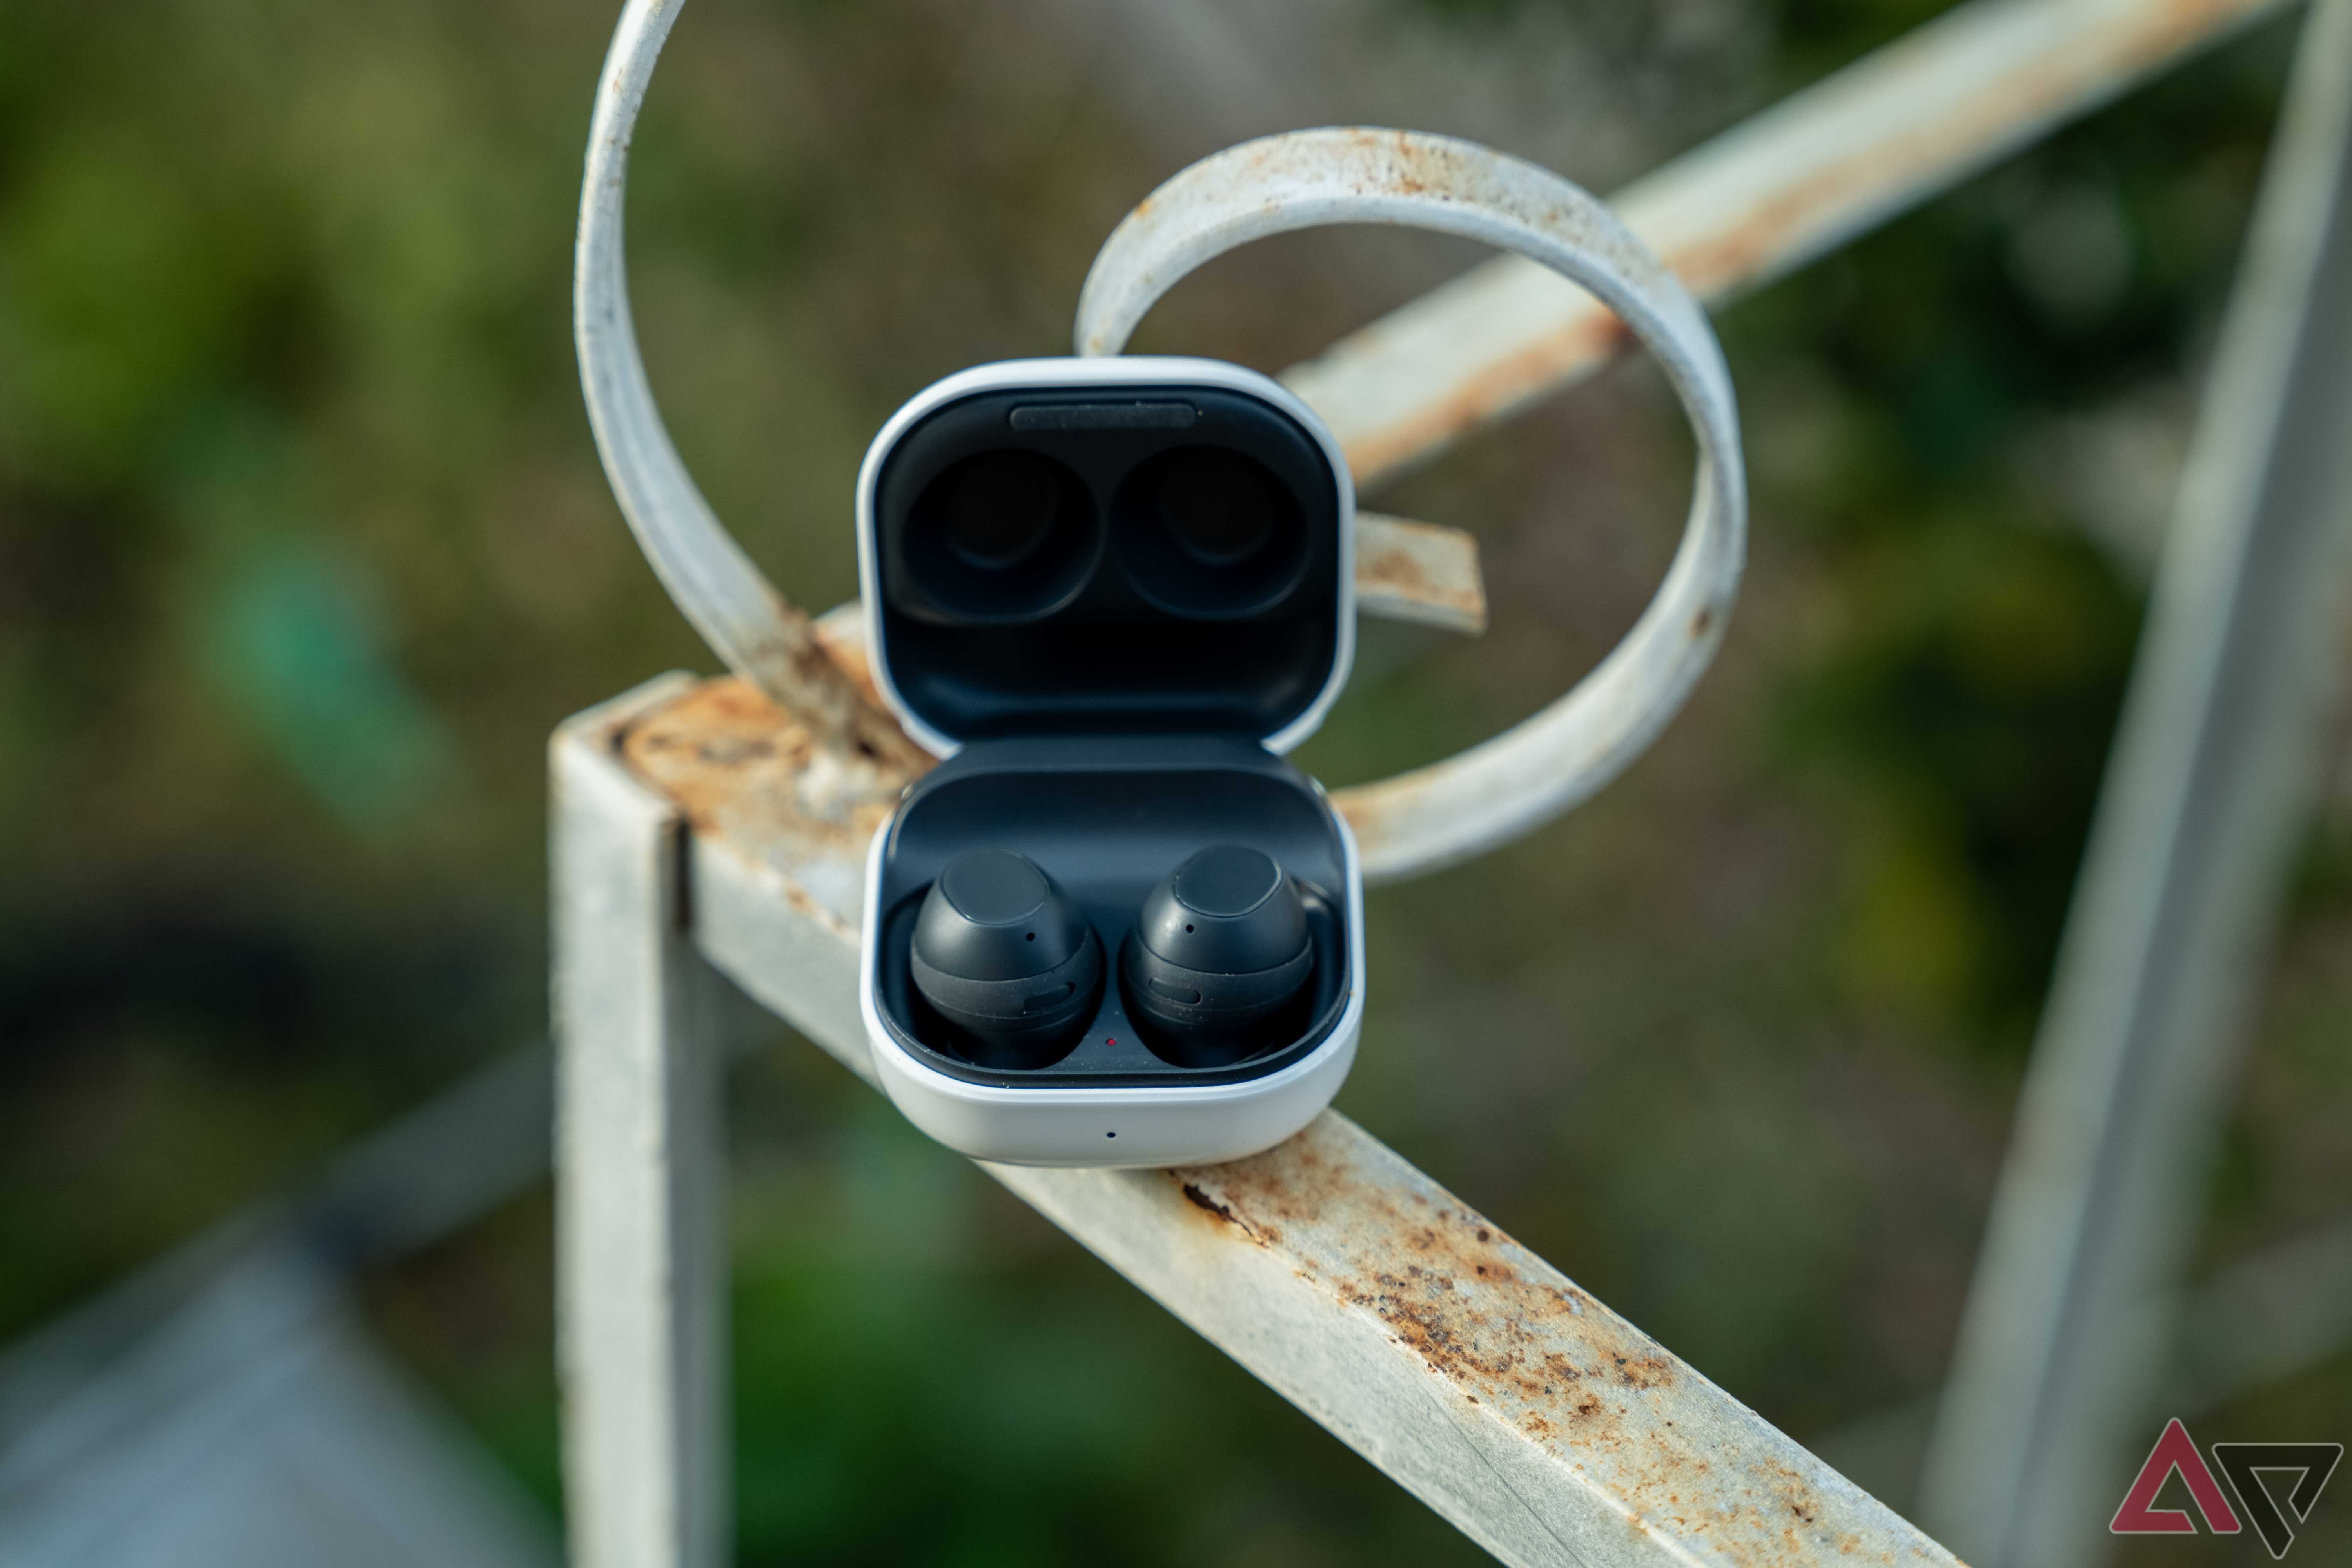 The Galaxy Buds FE case open on a rail